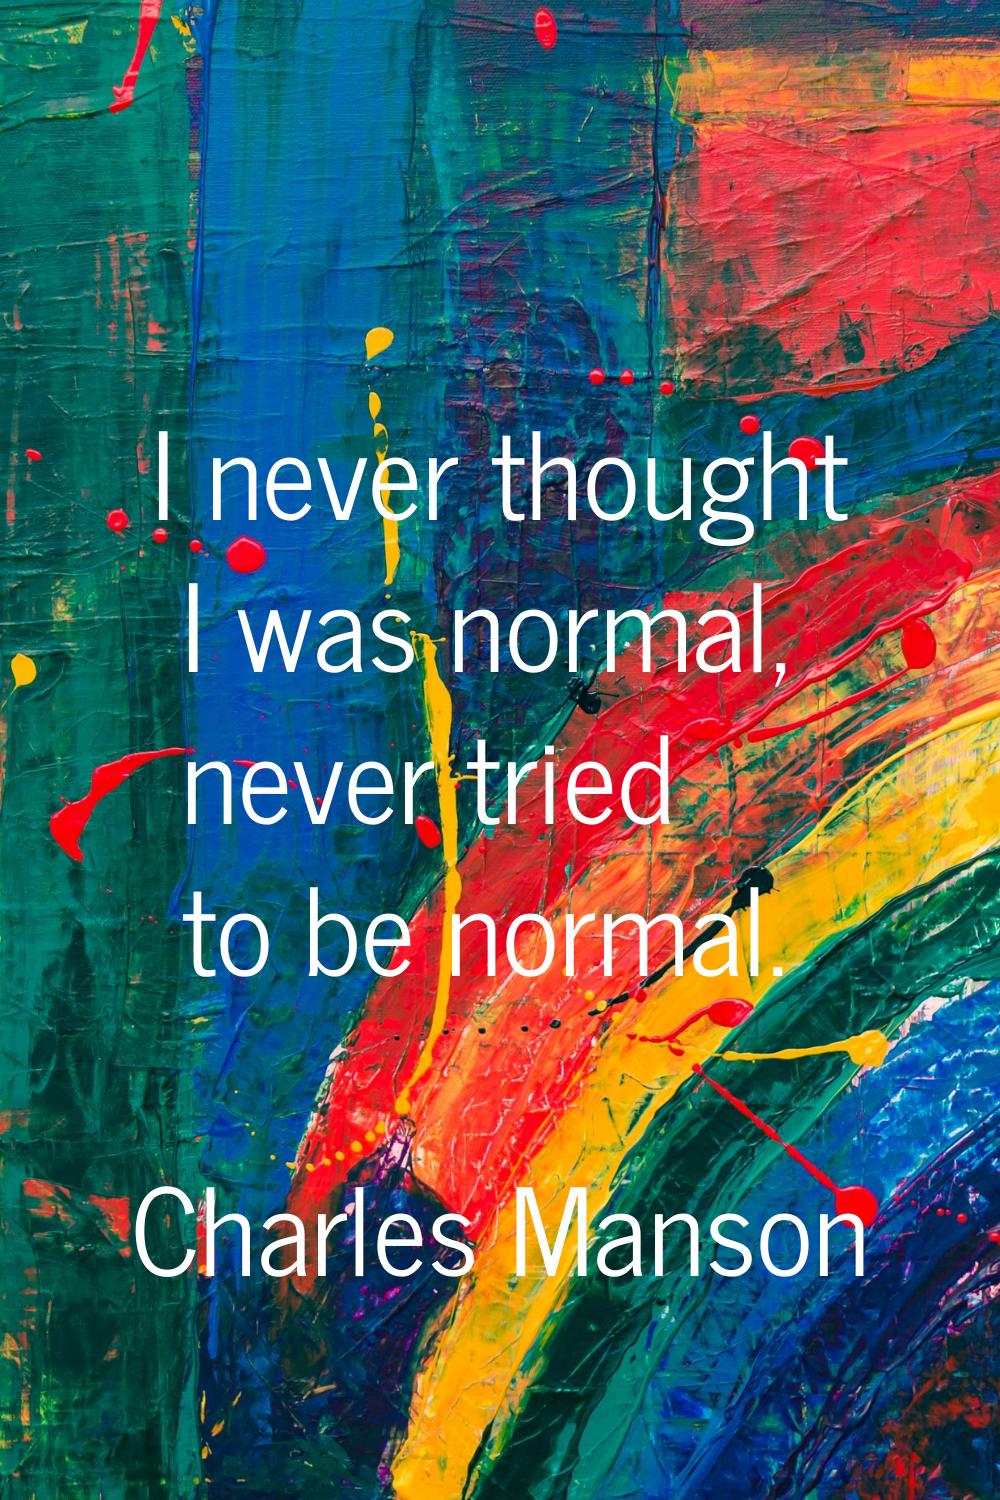 I never thought I was normal, never tried to be normal.